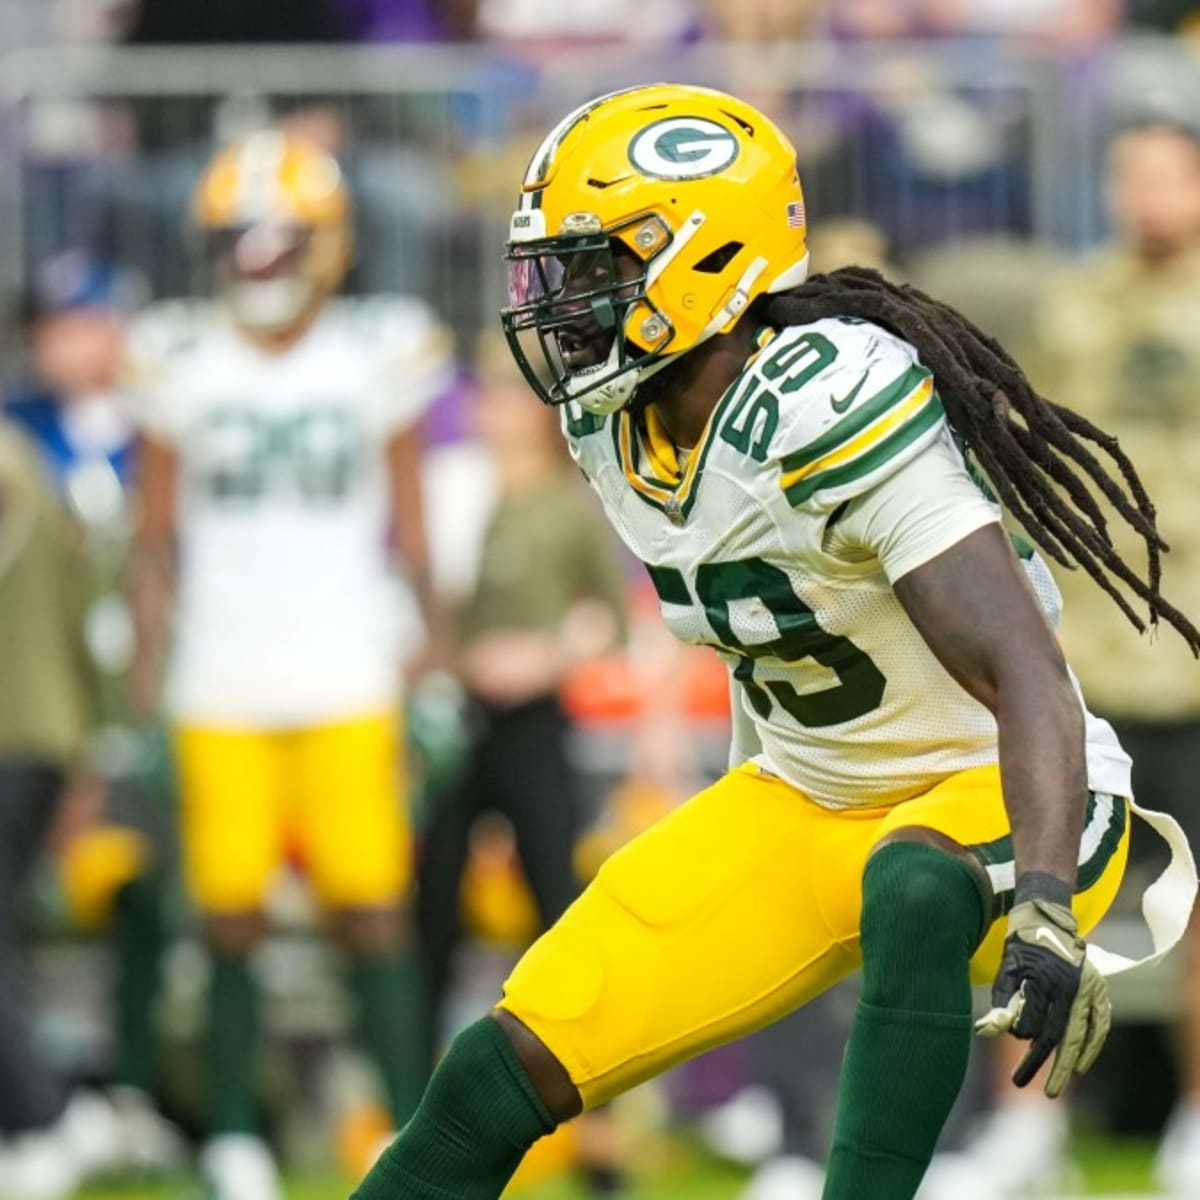 Packers want LB De'Vondre Campbell back, but two sides not nearing